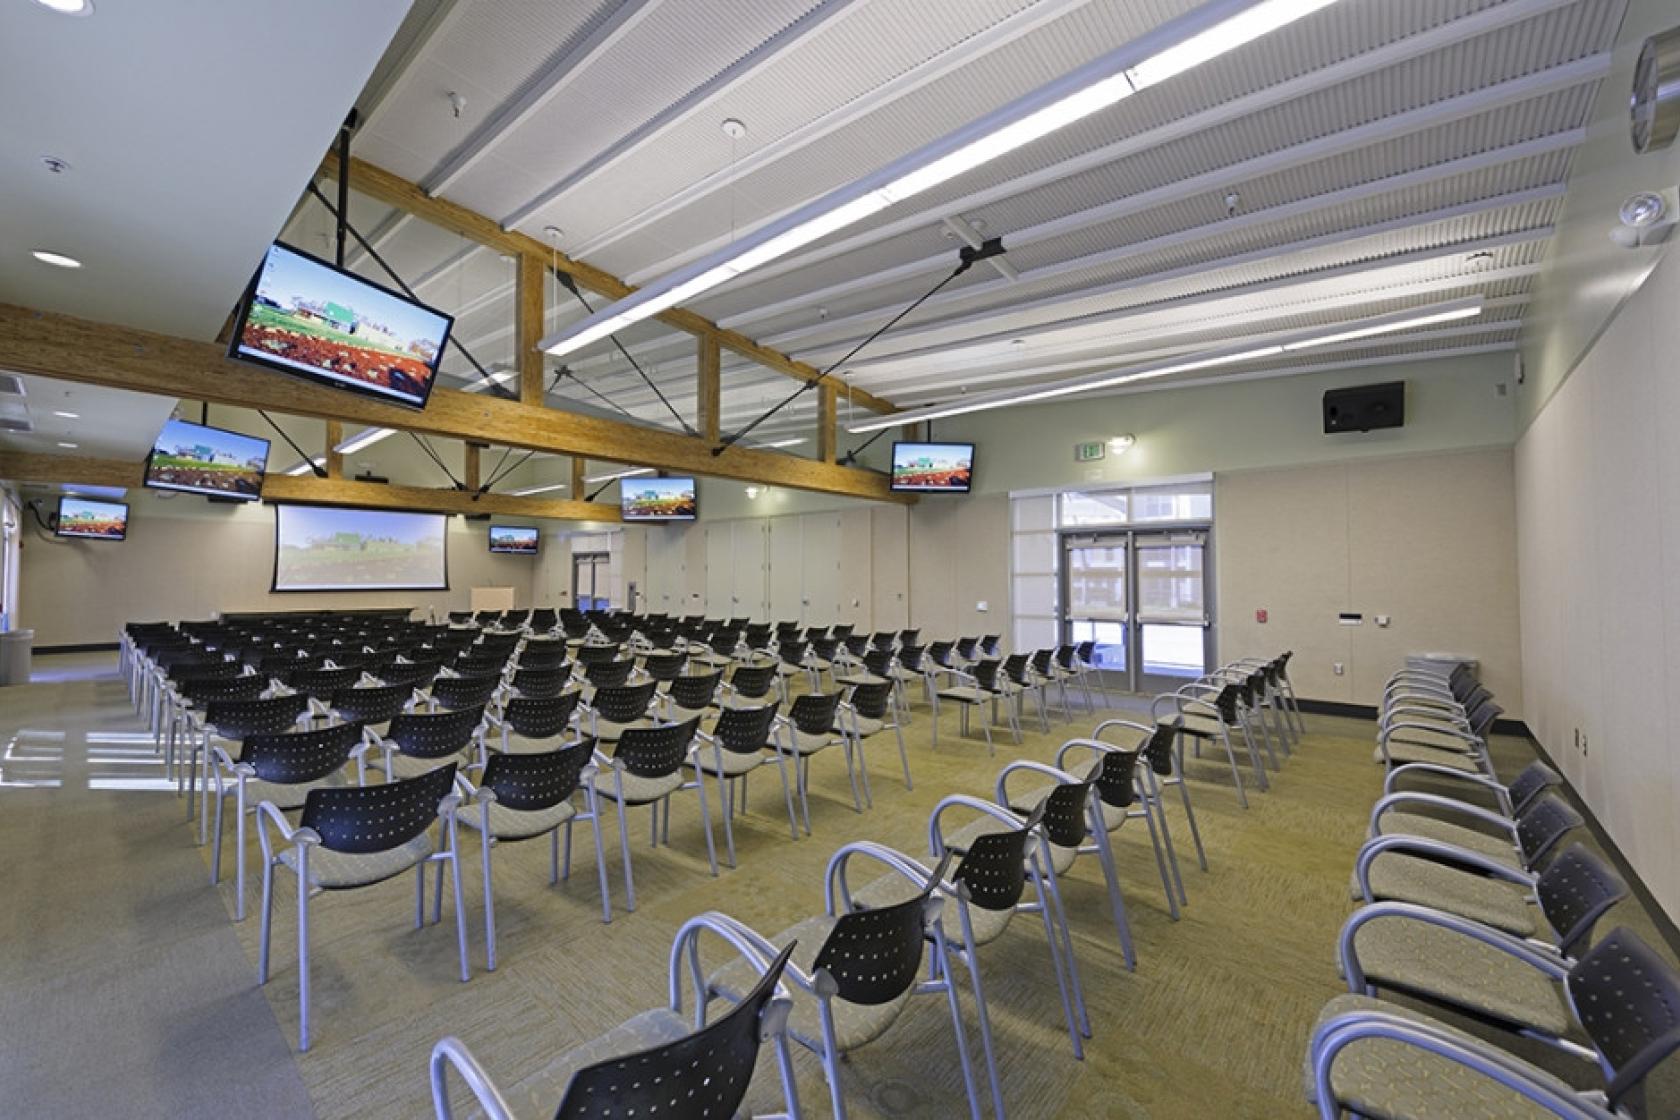 Inside Loma Pelona Center 1108 with rows of chairs,